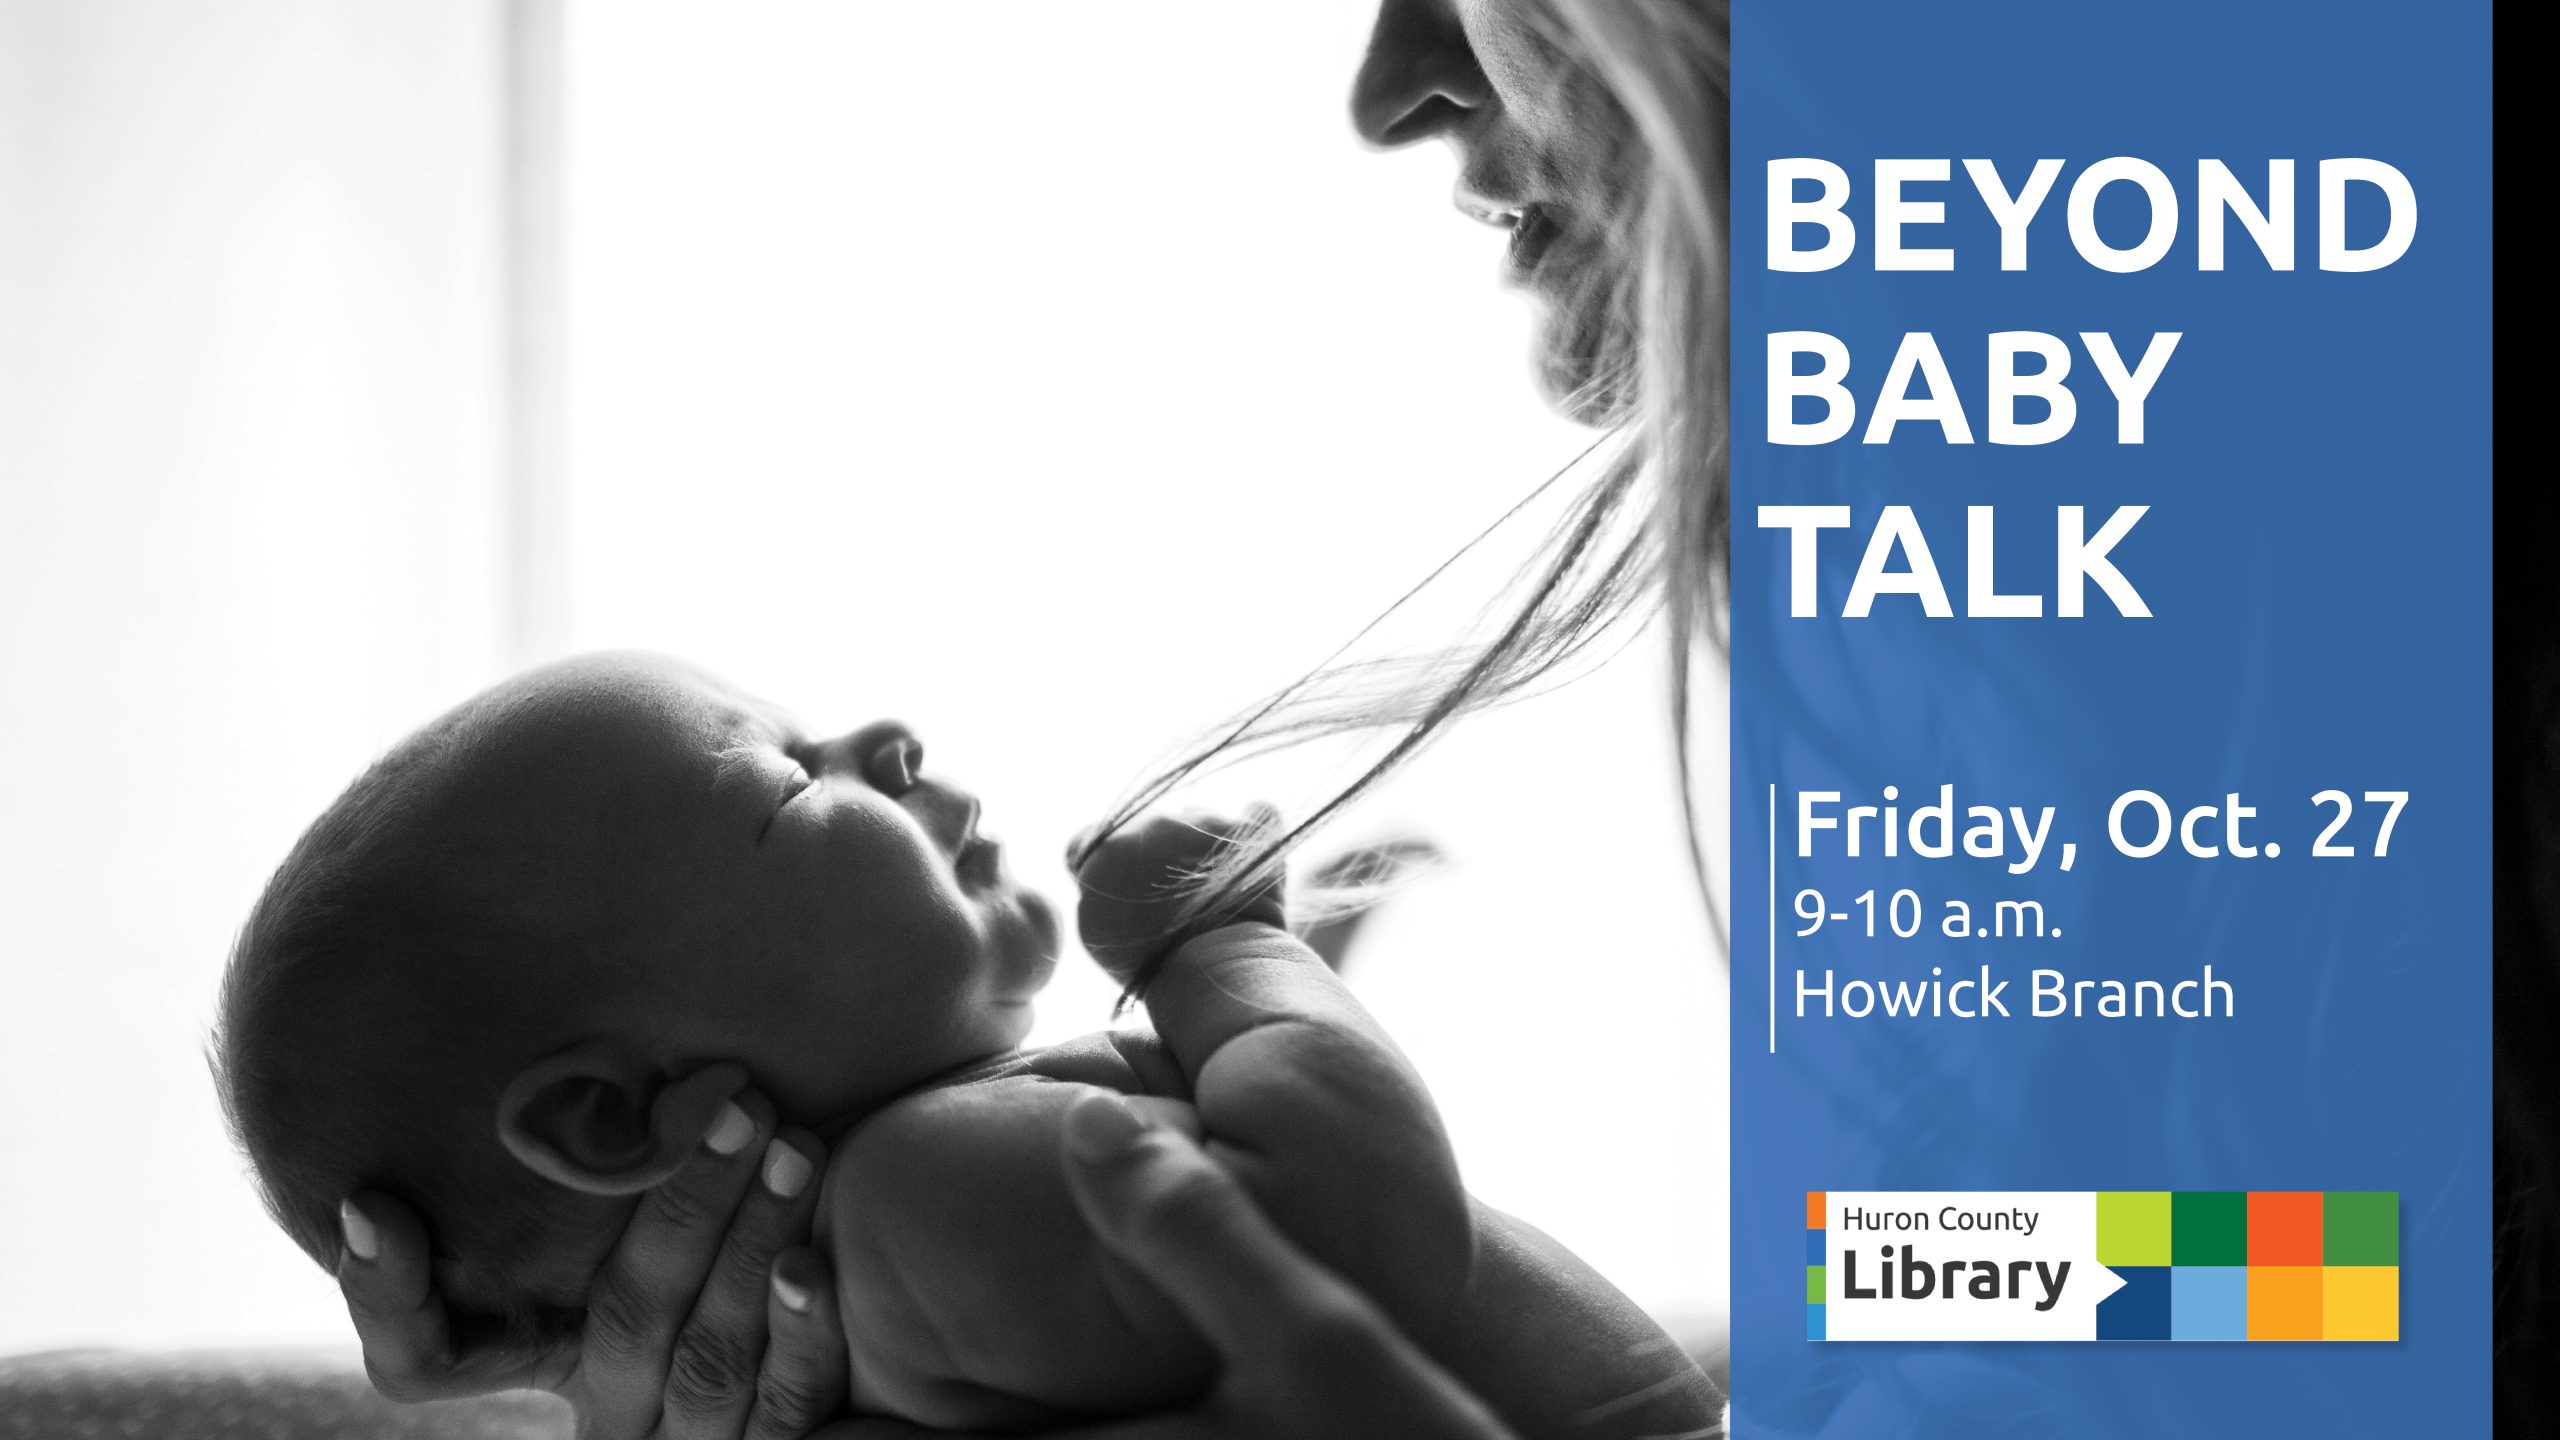 Black and white photo of a mom holding a baby with text promoting Beyond Baby Talk at Howick Branch